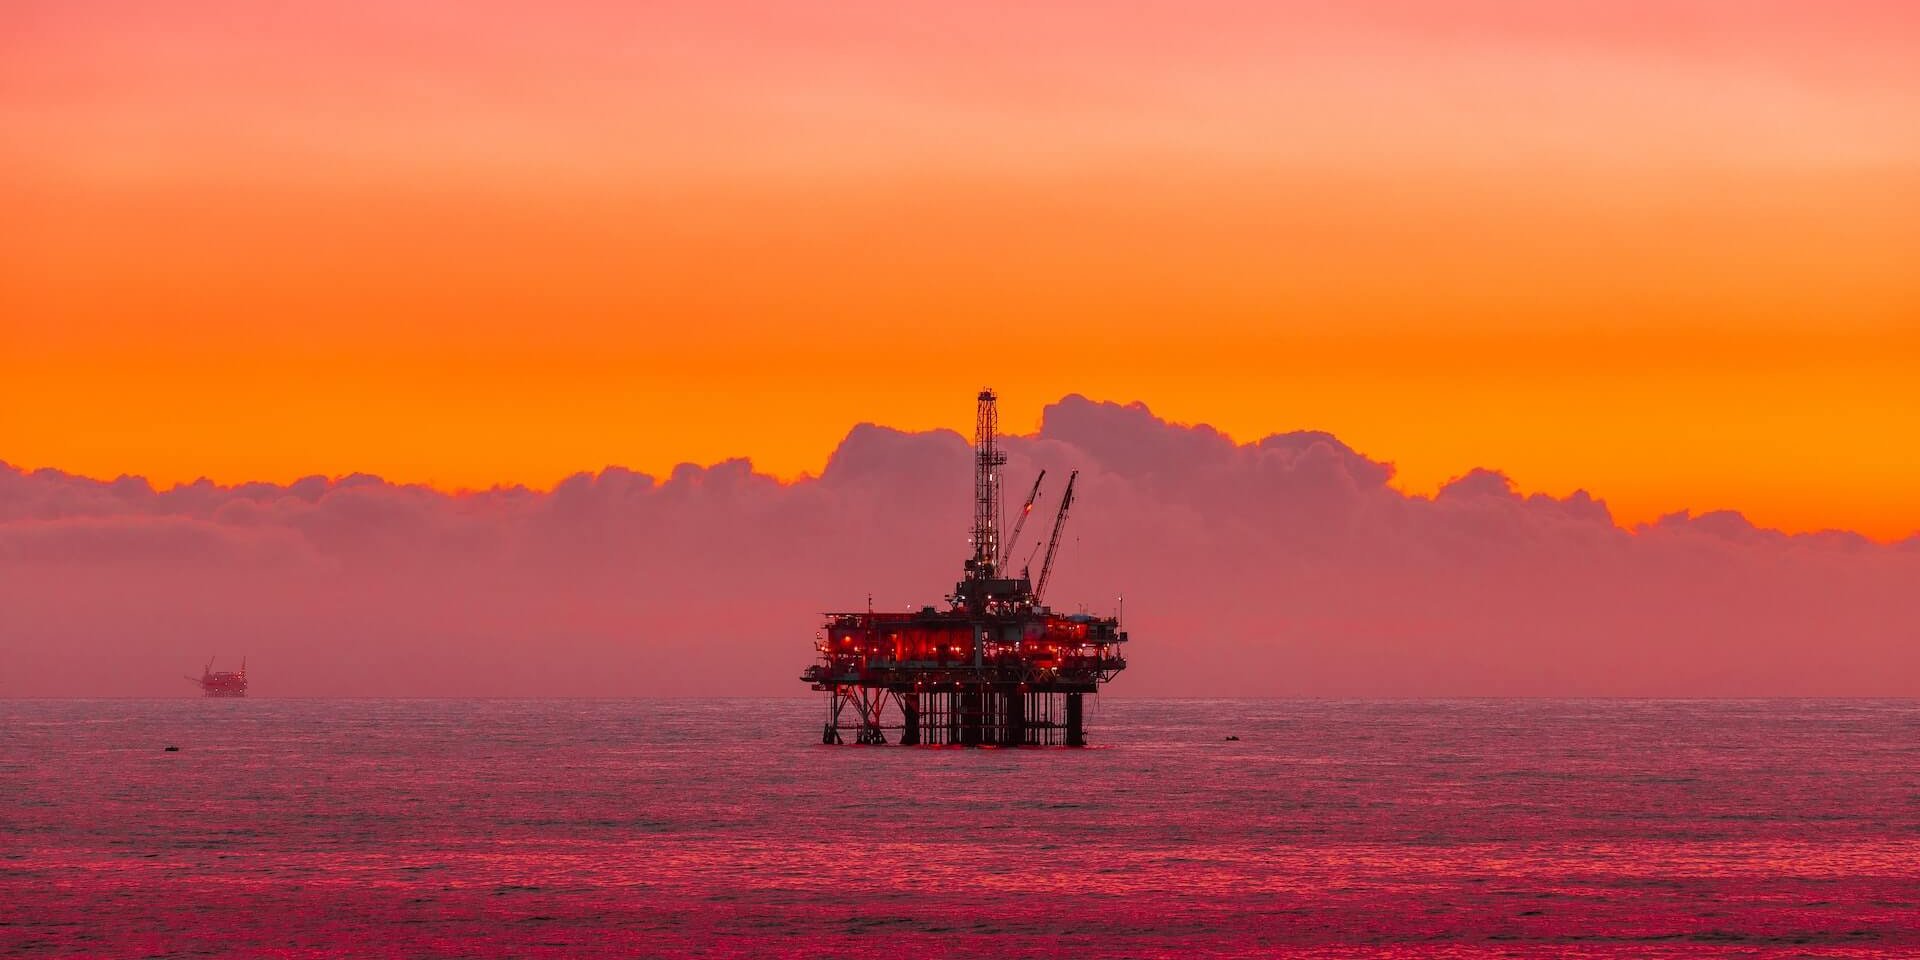 oil rig off shore with oil spill